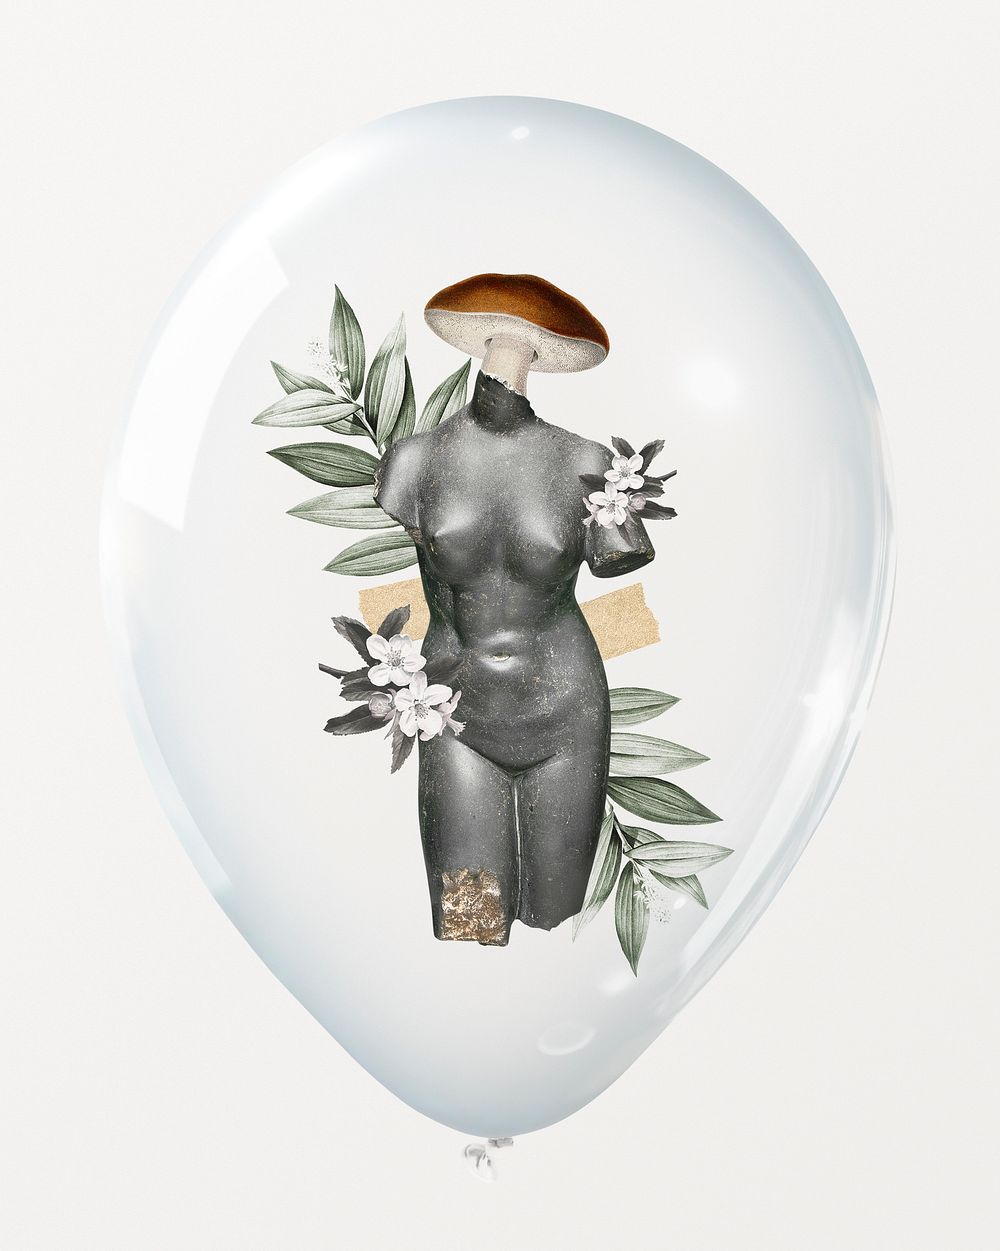 Aesthetic collage statue in clear balloon, mixed media